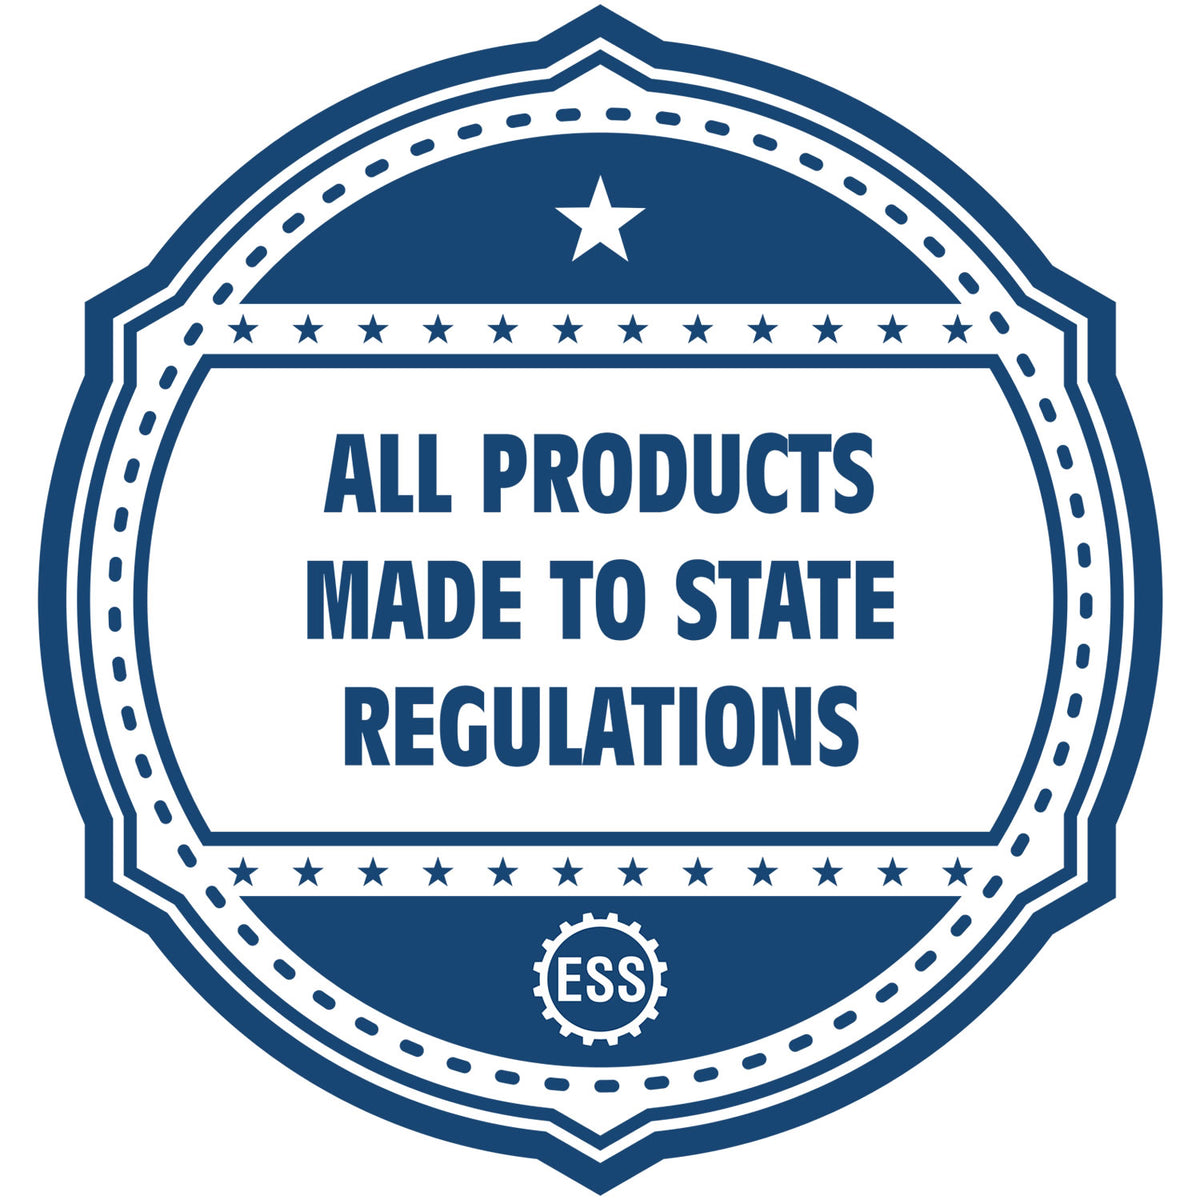 An icon or badge element for the Wooden Handle Missouri Rectangular Notary Public Stamp showing that this product is made in compliance with state regulations.